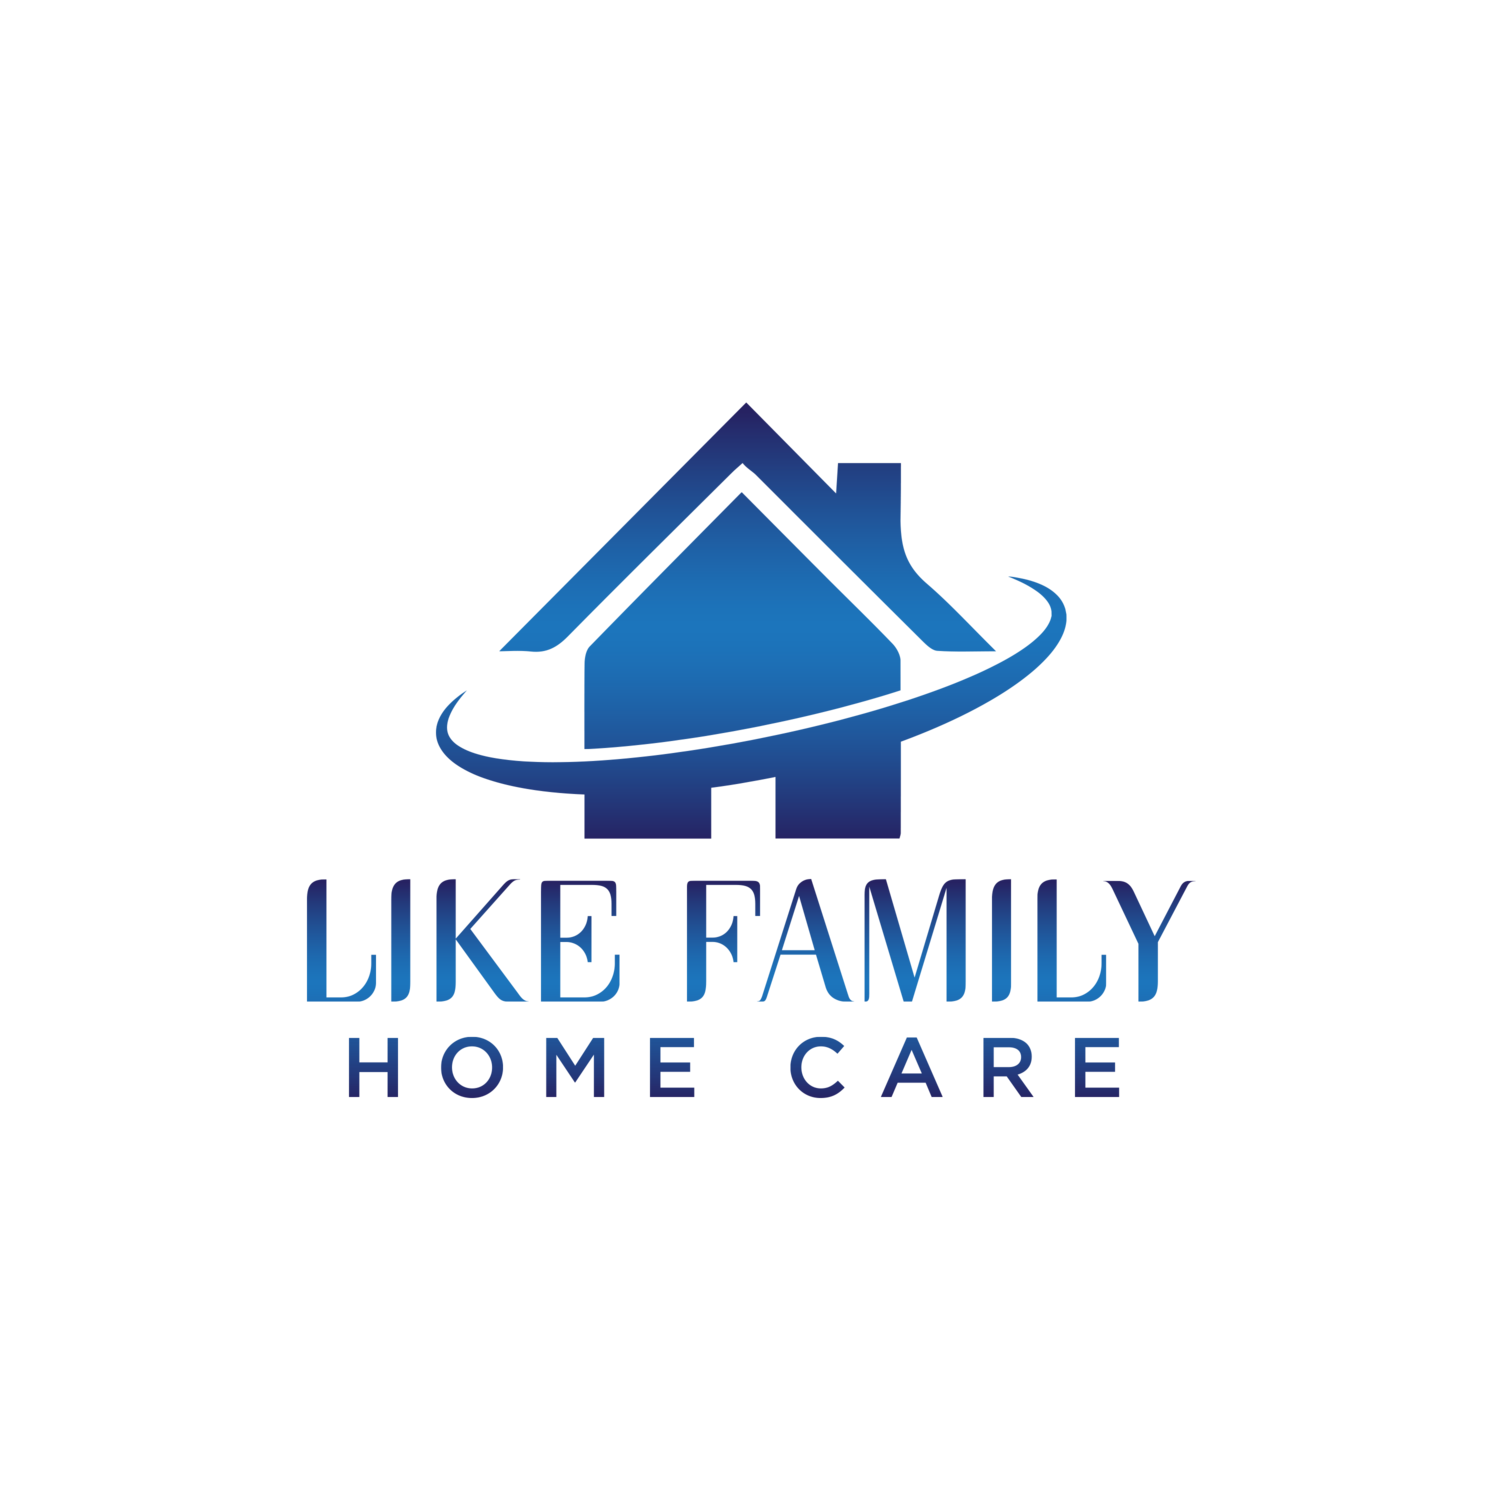 Home Care Services | In-Home Care Services - Gilbert, Chandler, Phoenix AZ